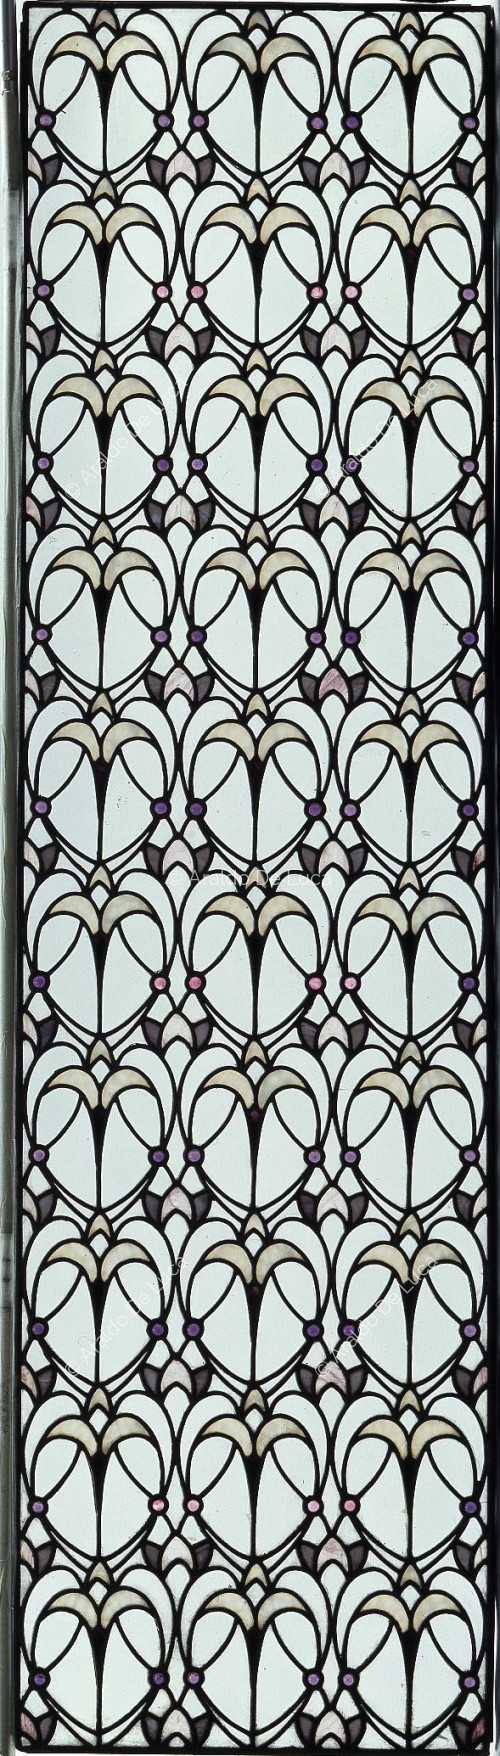 Stained glass window with geometric design